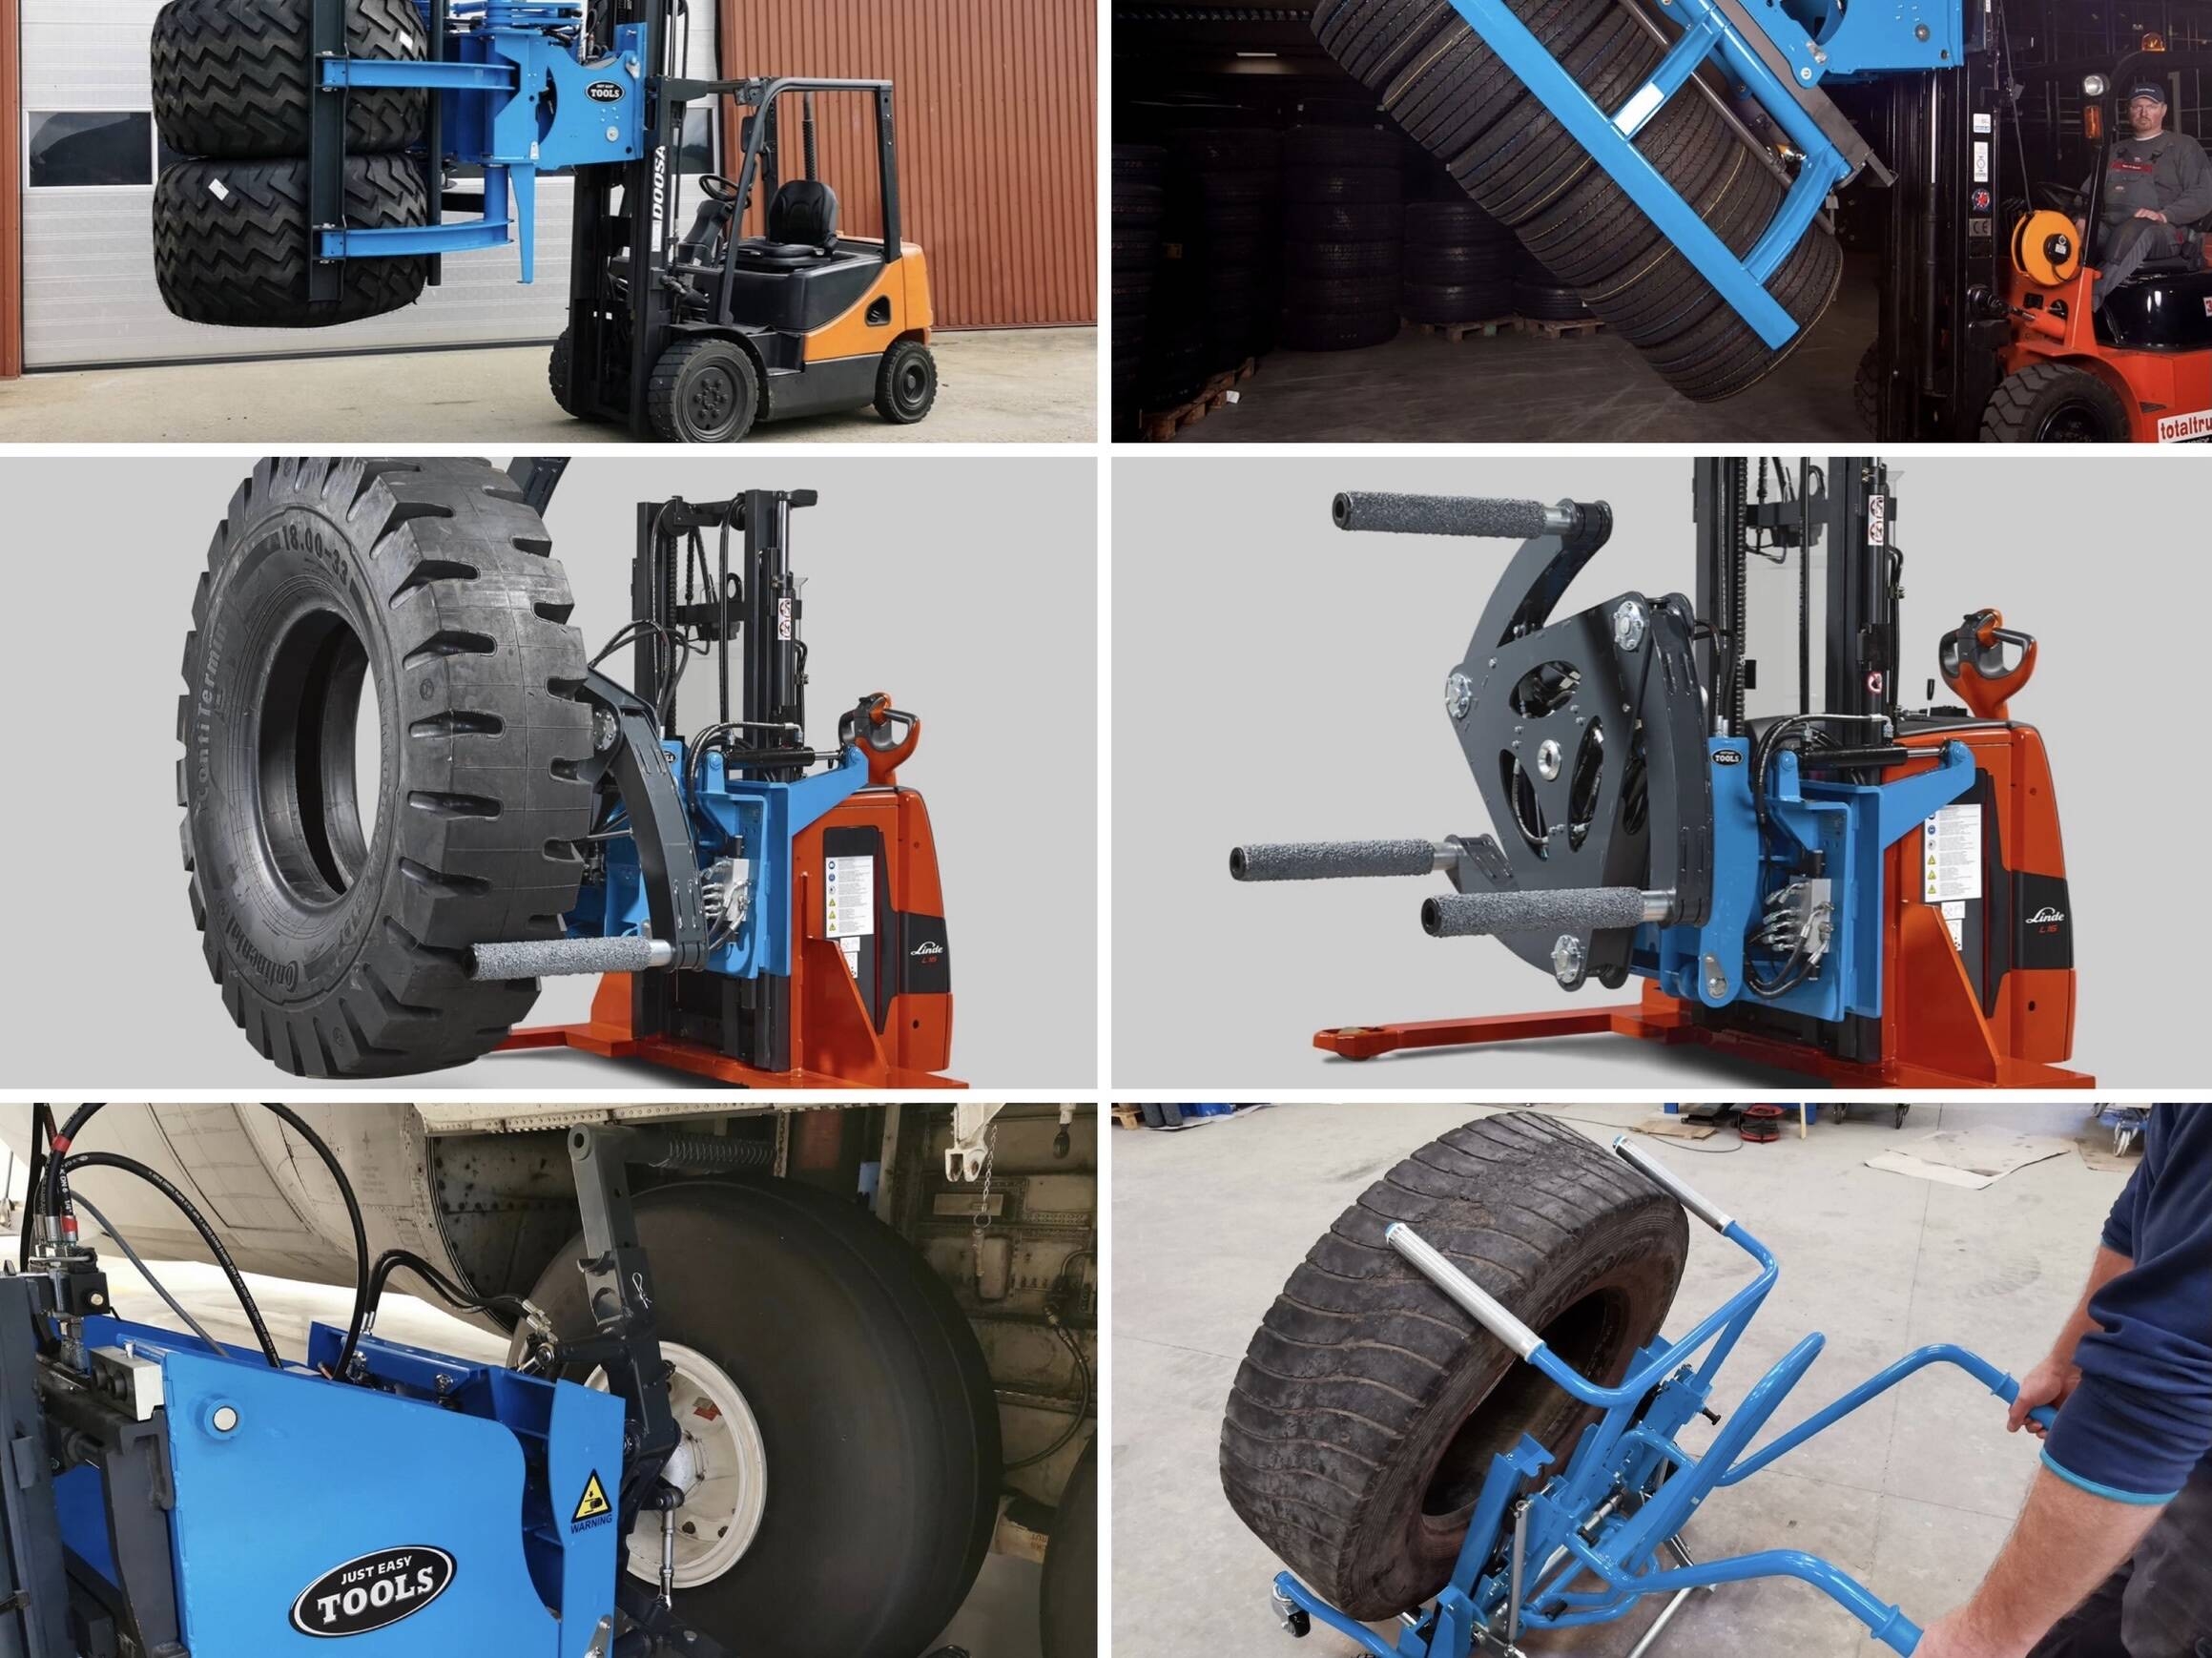 Hydraulic clamp program for tyres and wheel removal vices adaptable to forklifts